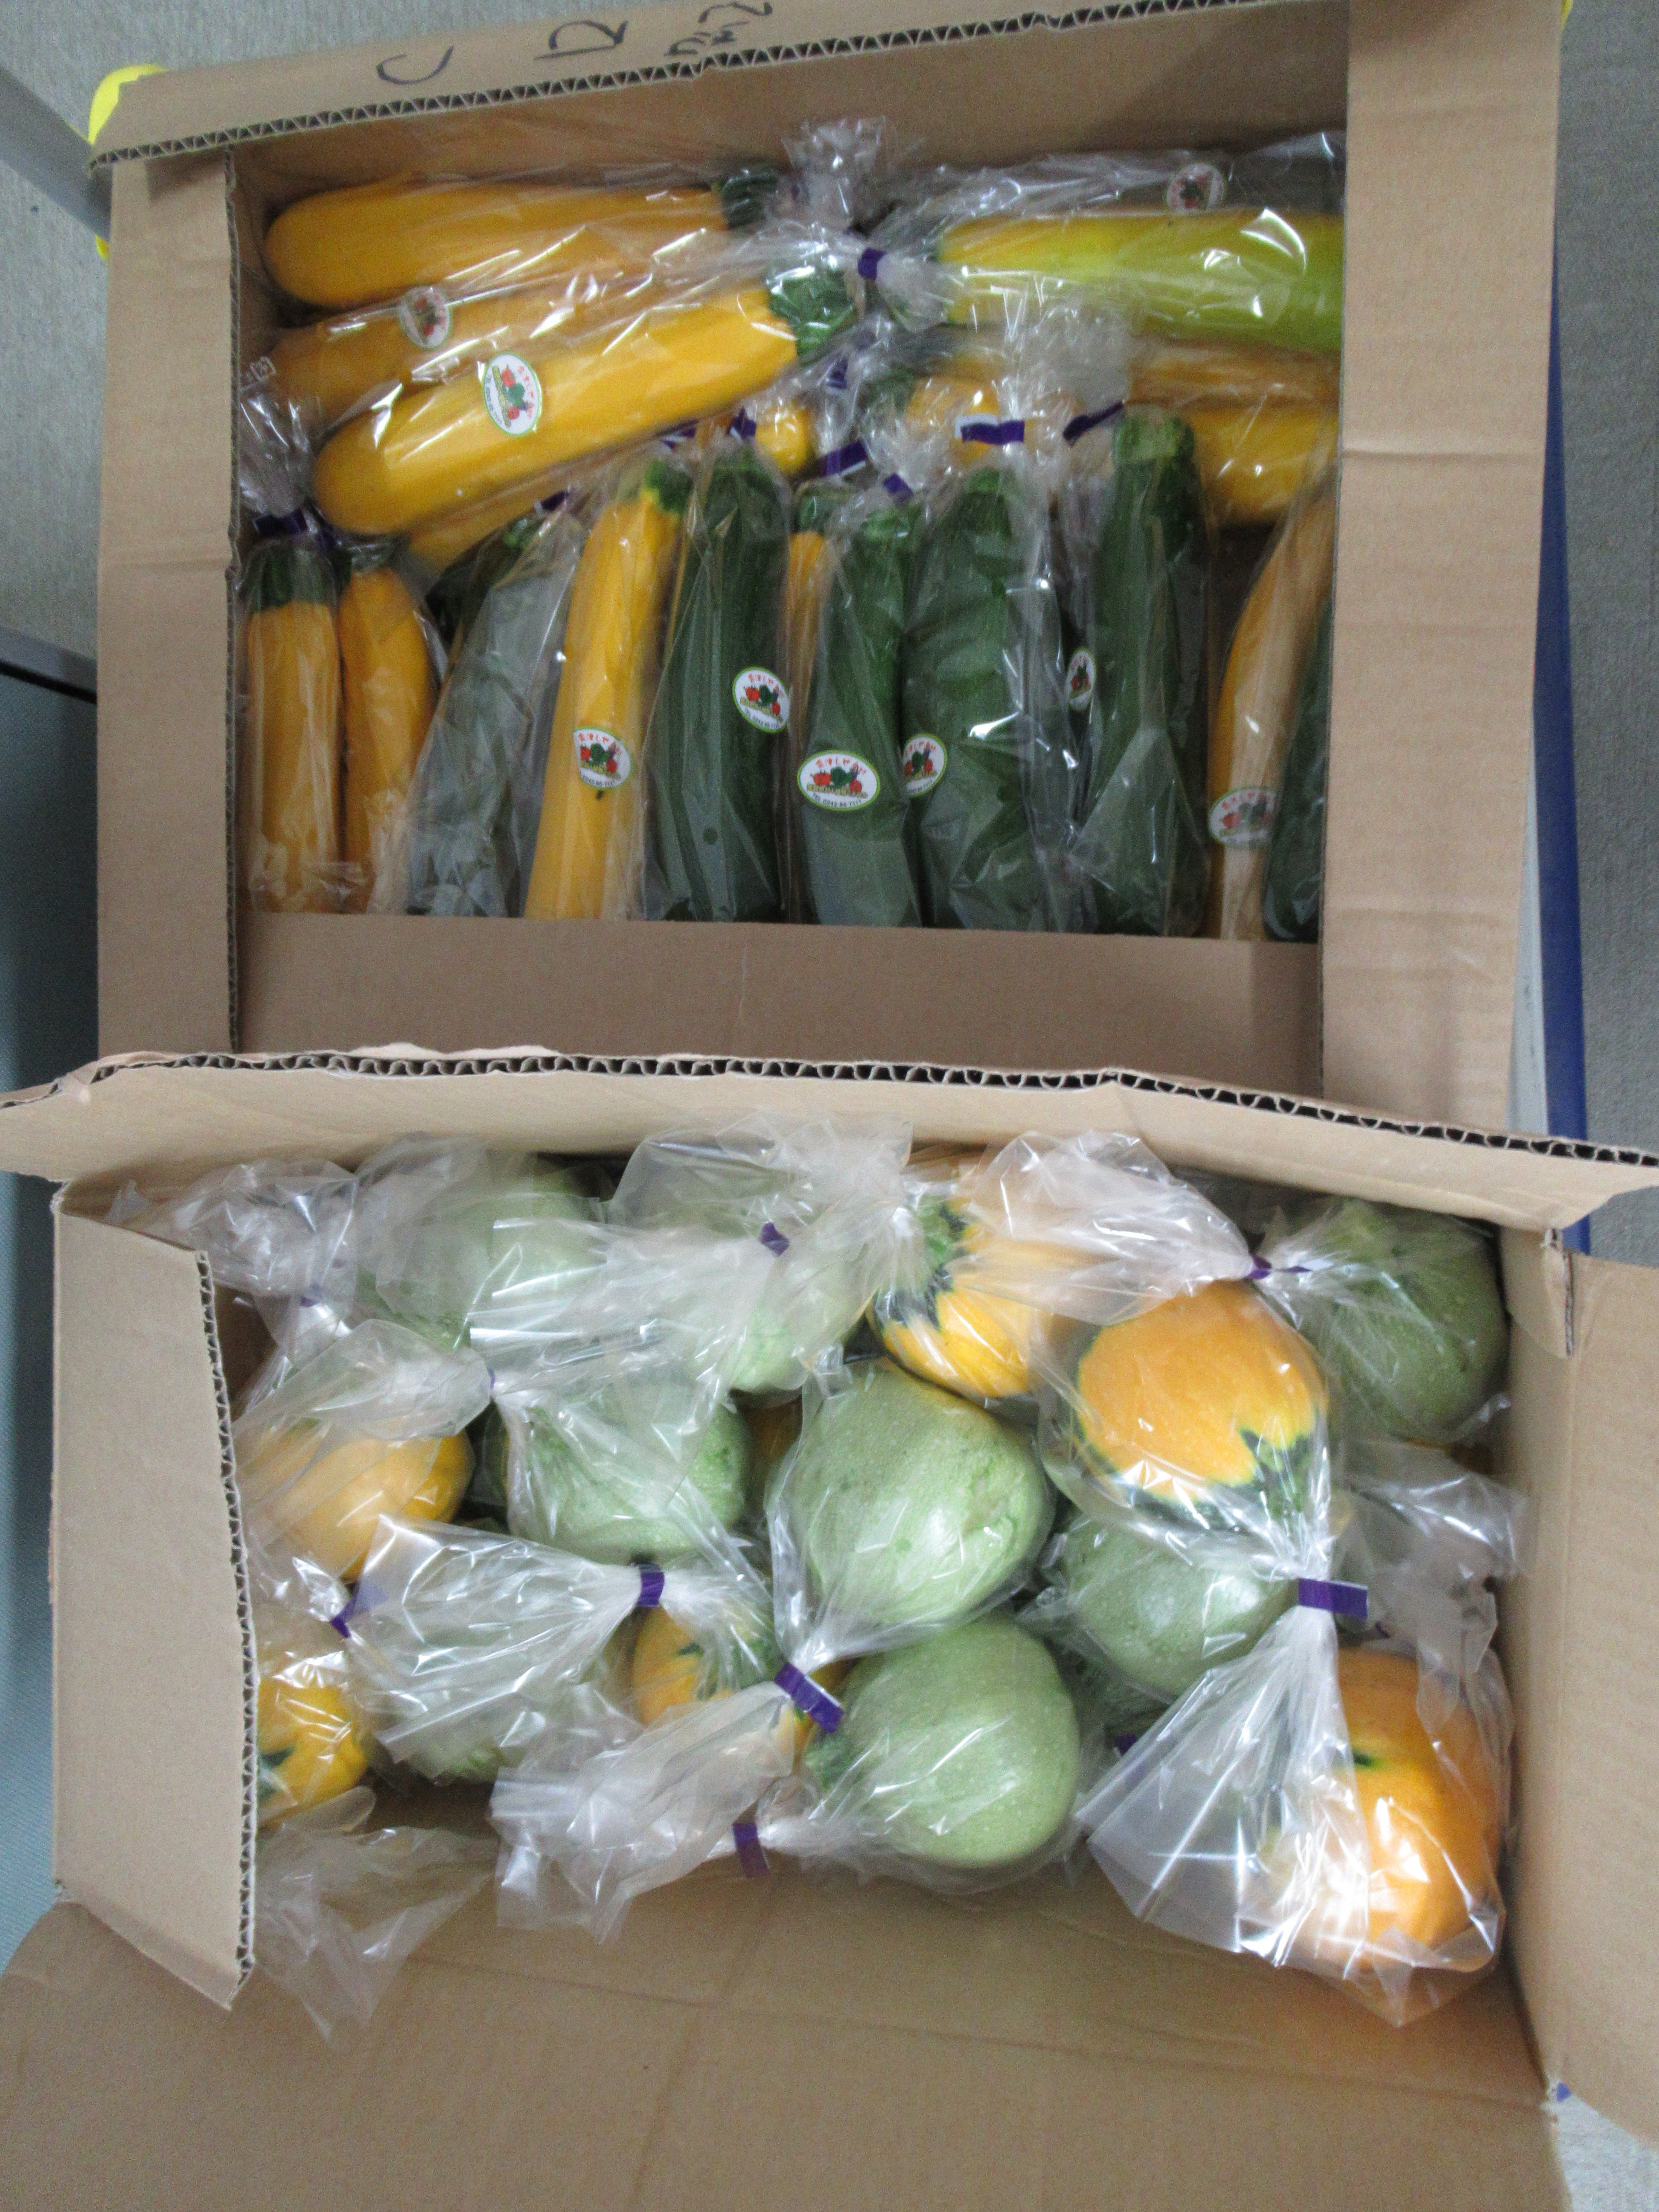 Takahashi-san donated vegetable (zucchini) and money to the international students